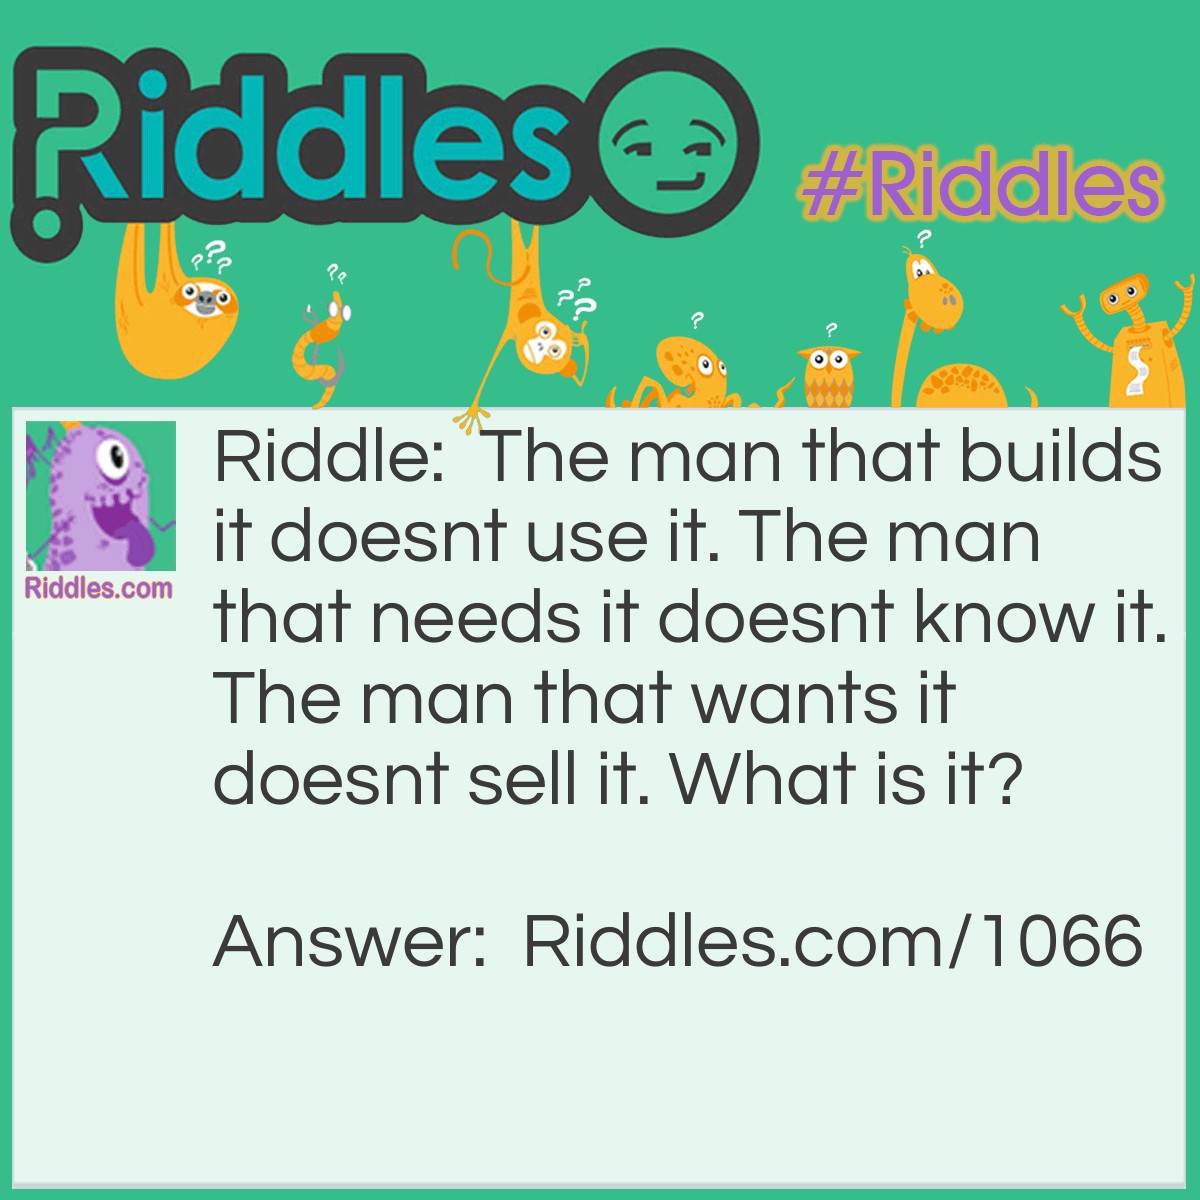 Riddle: The man that builds it doesnt use it. The man that needs it doesnt know it. The man that wants it doesnt sell it. What is it? Answer: A coffin/casket.